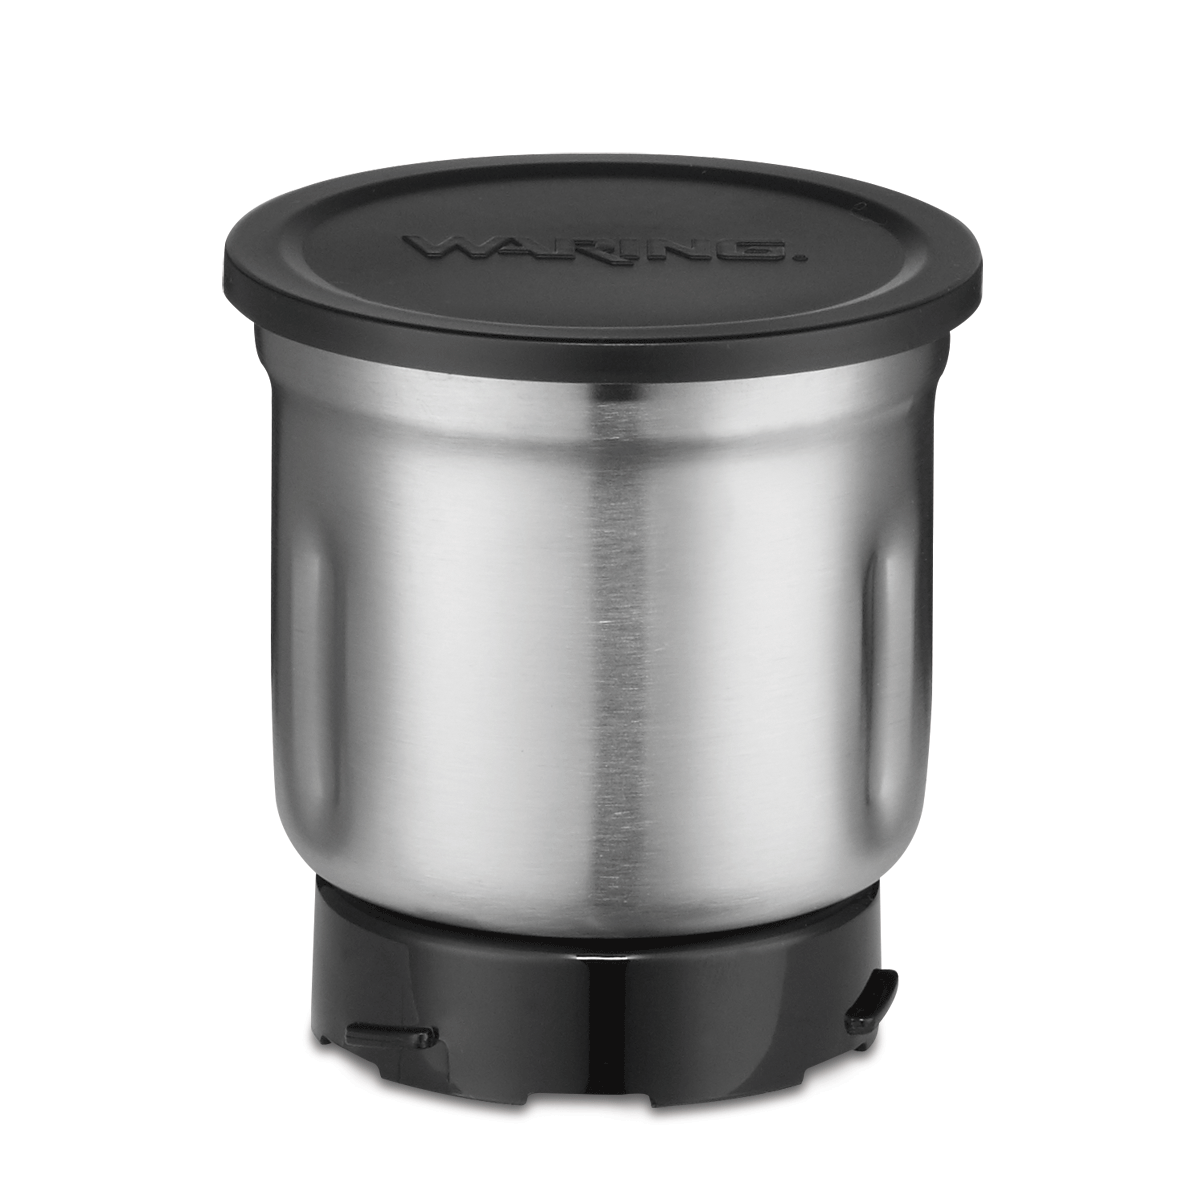 https://www.waringlab.com/assets/images/database/products/cac103-waring-lab-grinding-bowl-with-lid-main.png